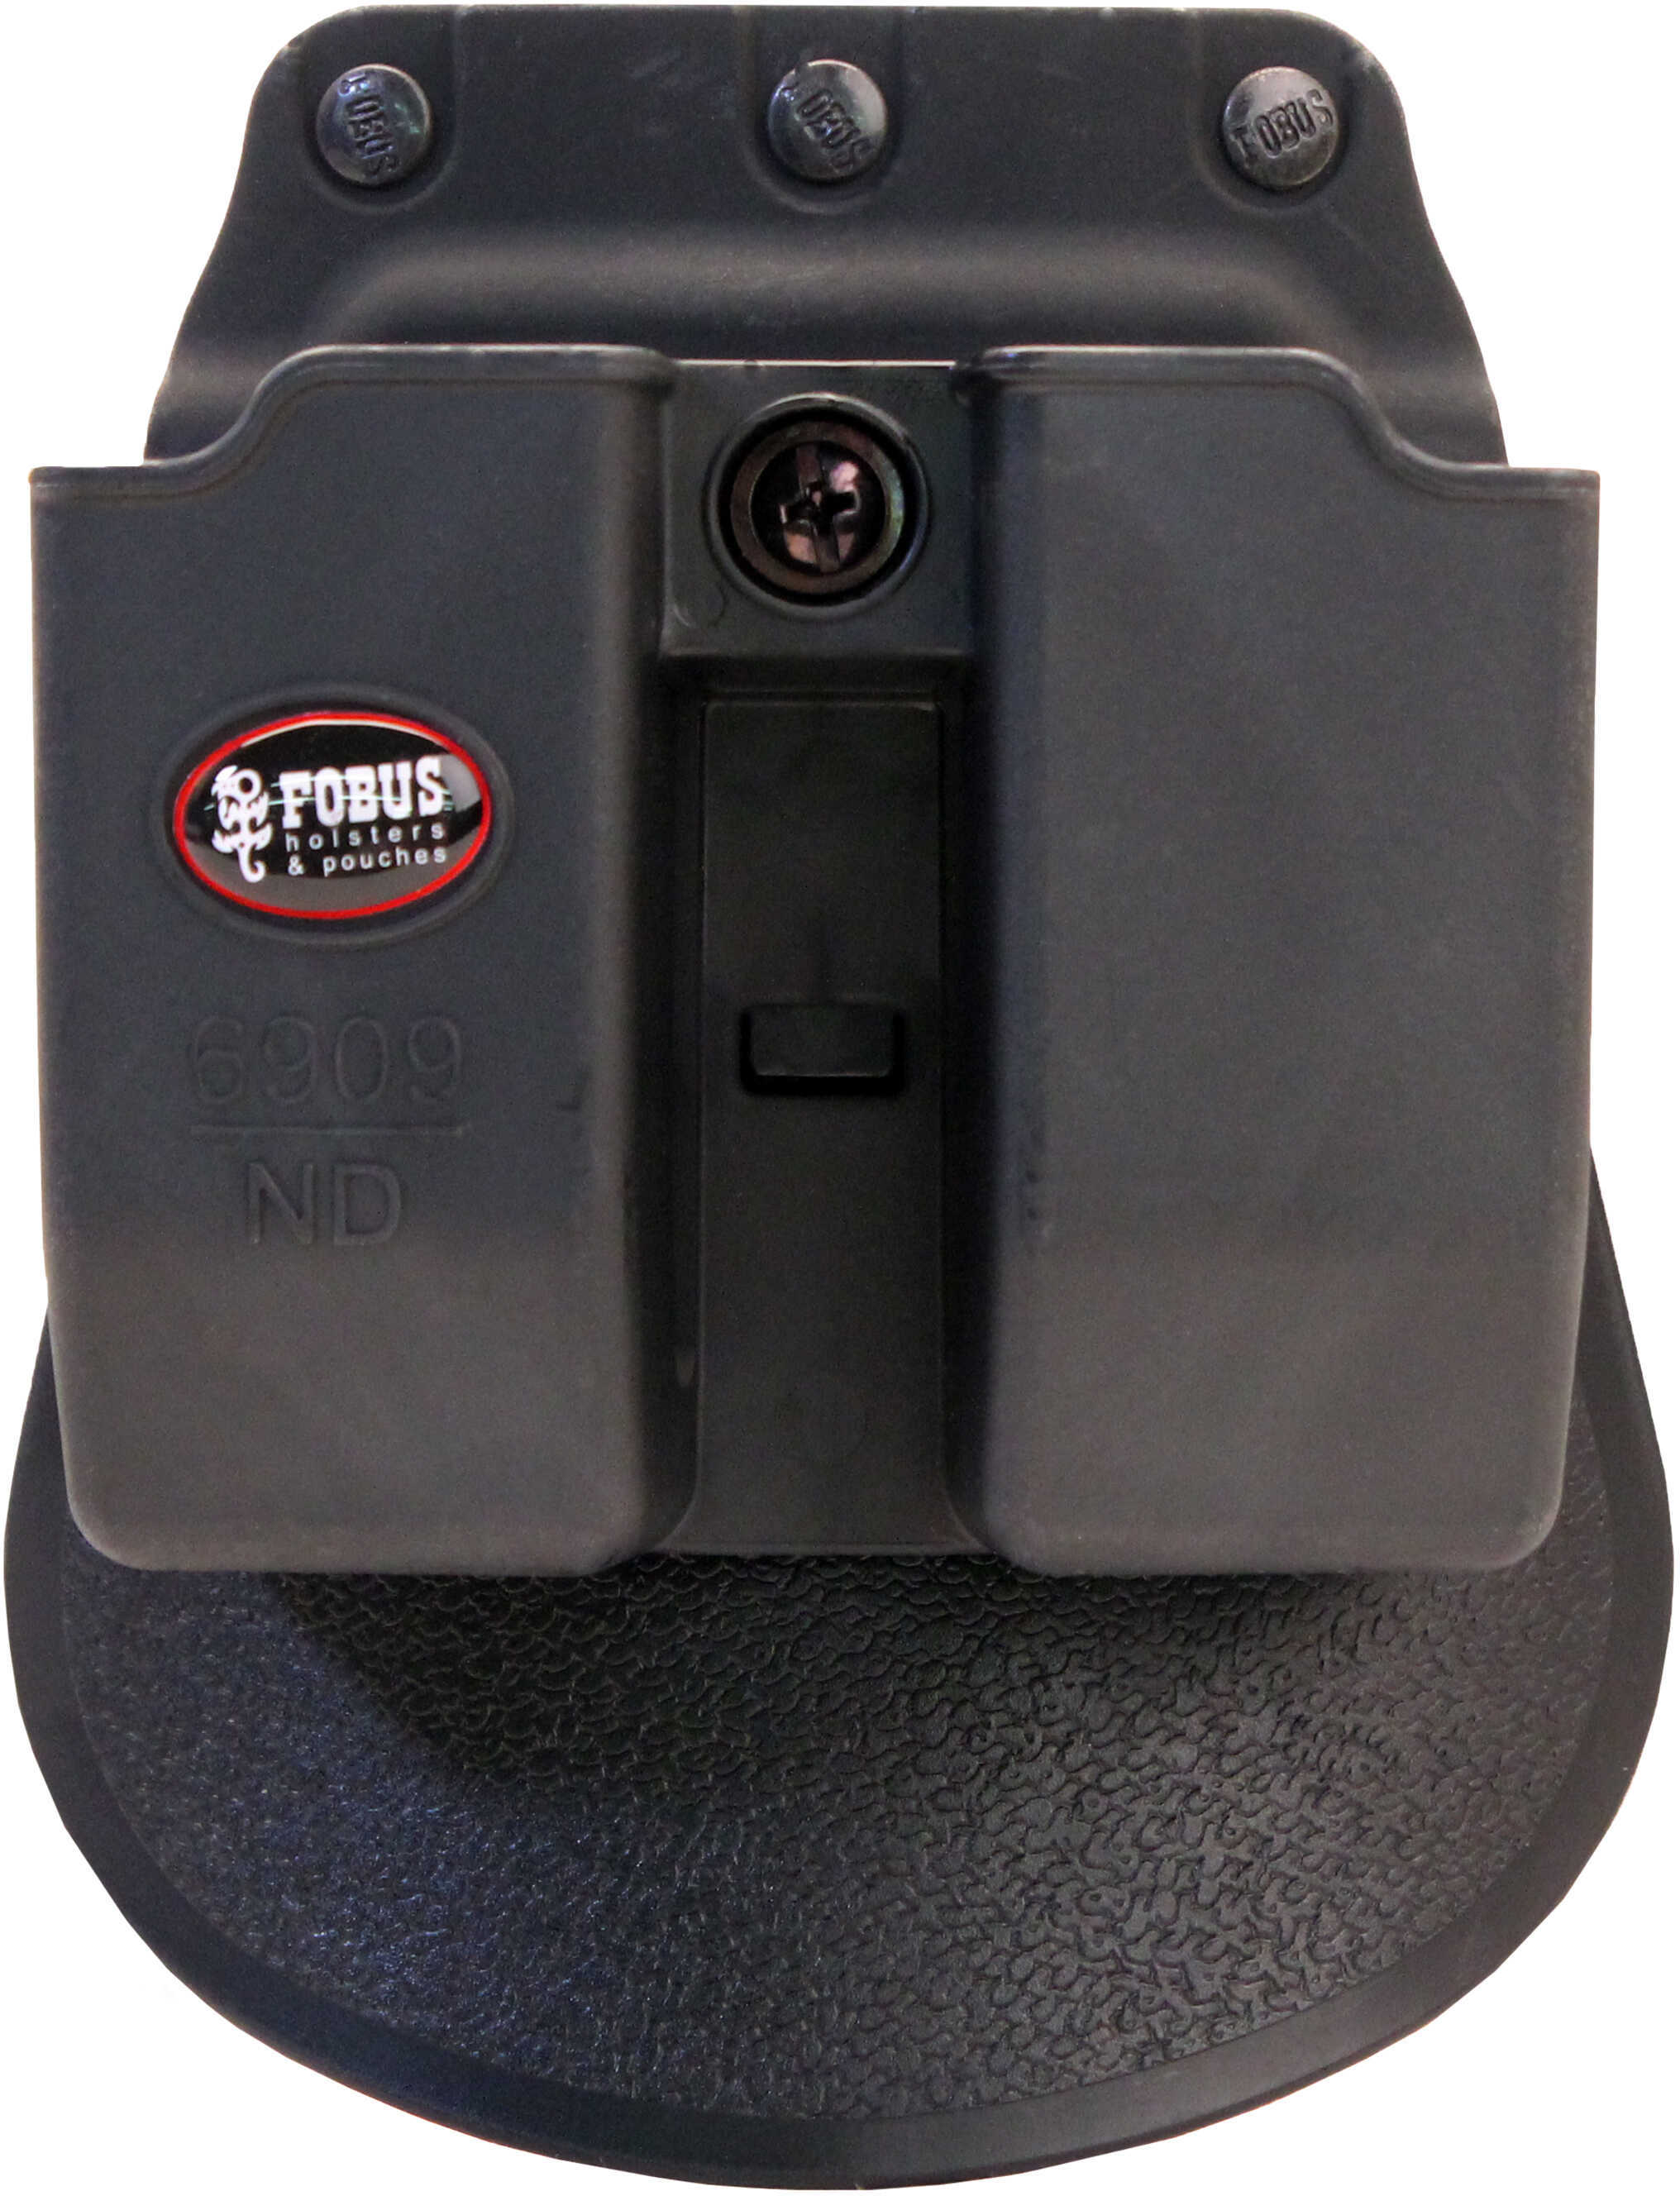 Fobus Paddle Magazine Pouch Roto Black Fits Double Sig/Ber/Brn Kydex 6909NDRP